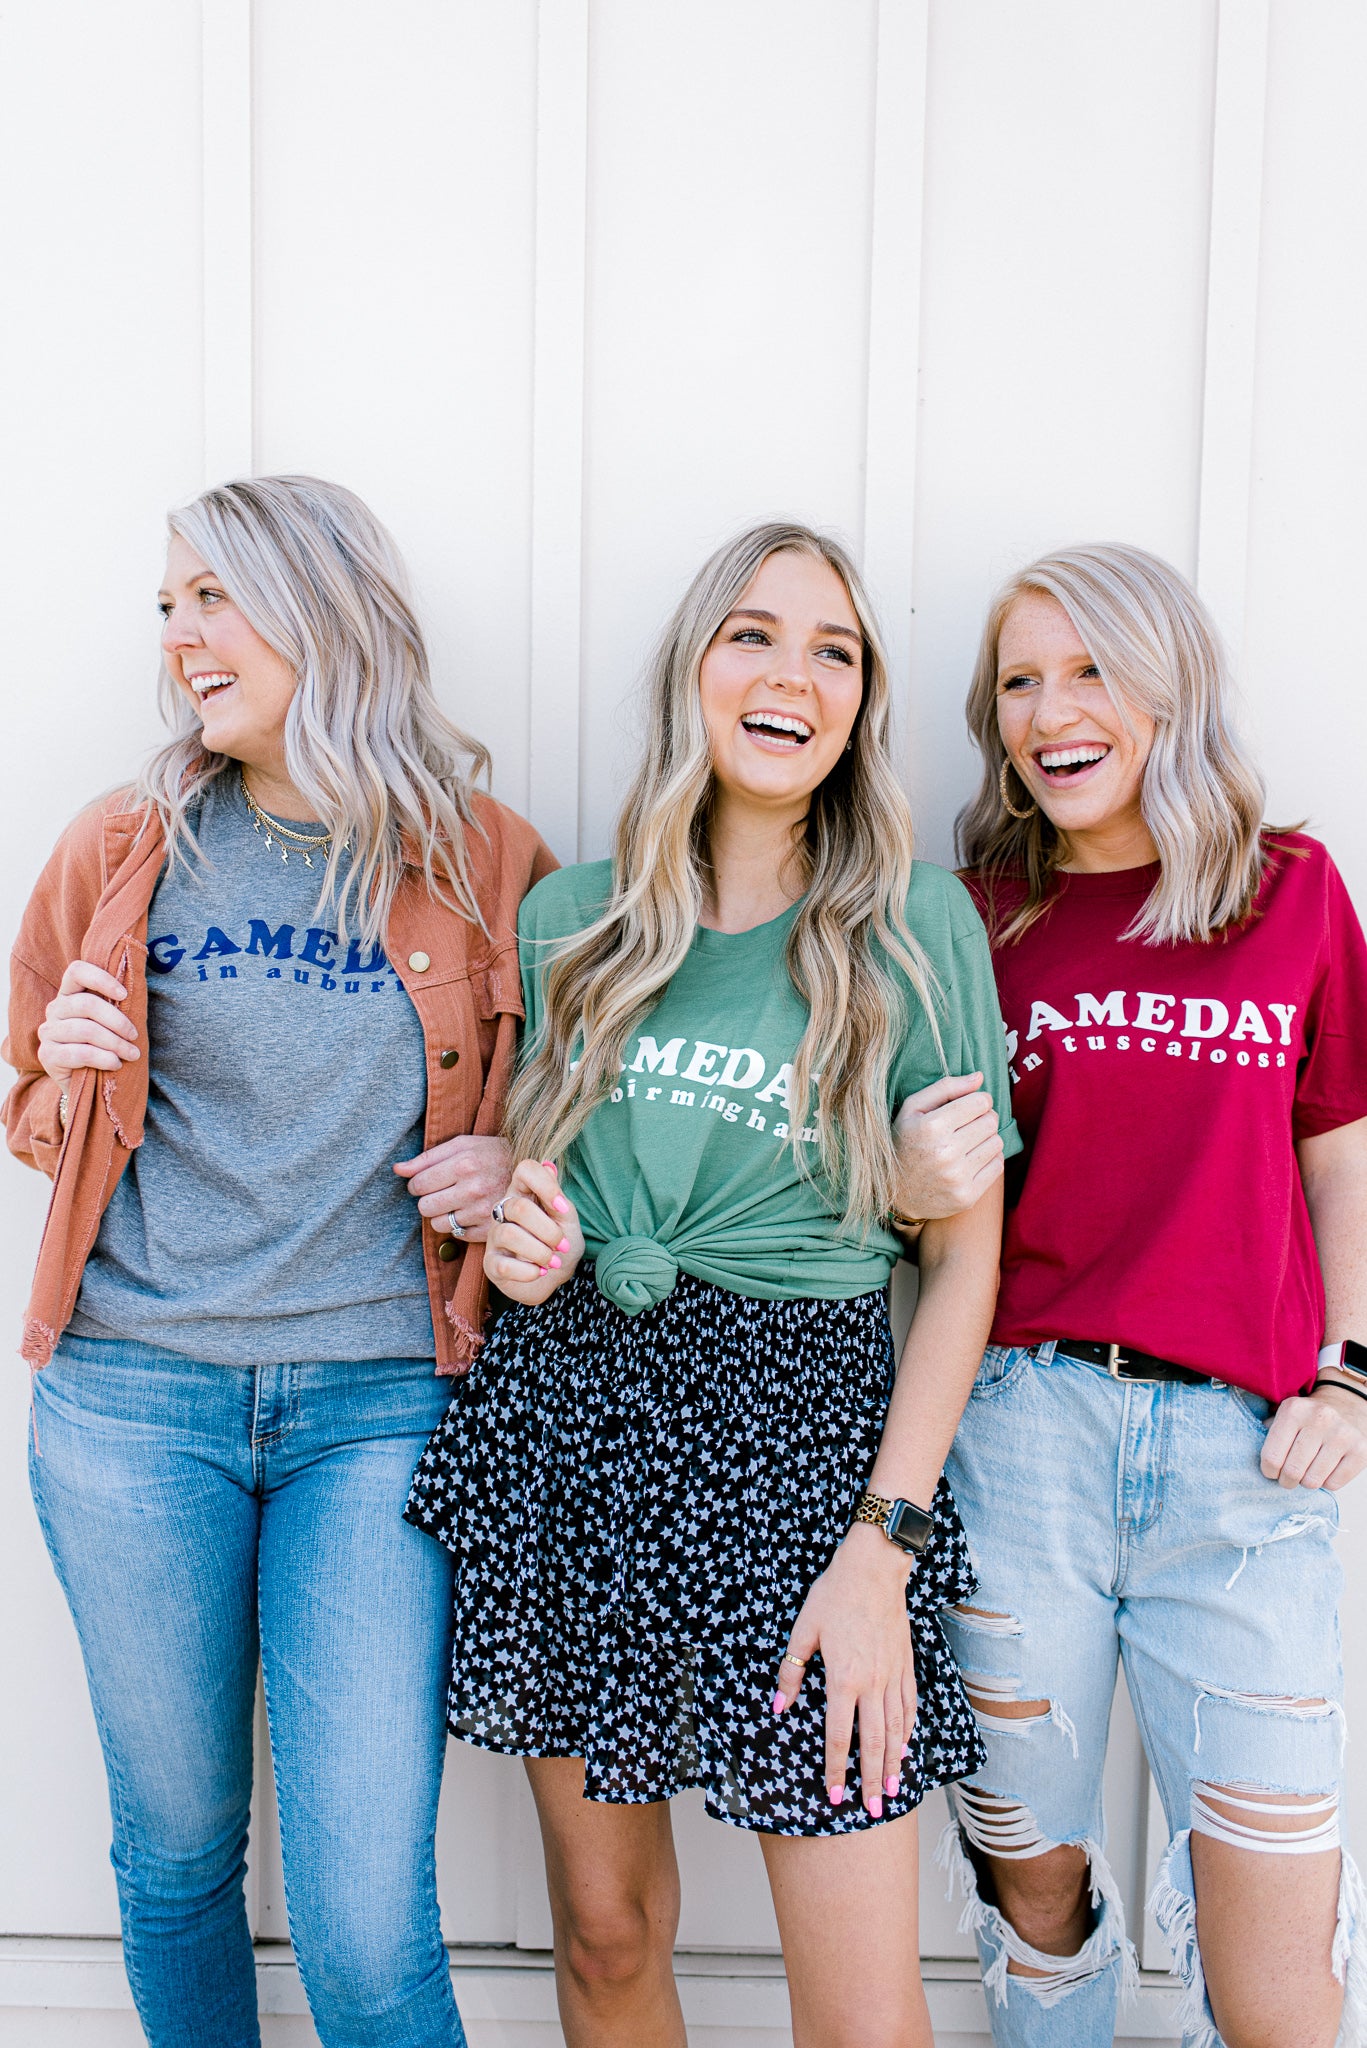 Gameday in Tuscaloosa | Adult Tee-Adult Tee-Sister Shirts-Sister Shirts, Cute & Custom Tees for Mama & Littles in Trussville, Alabama.